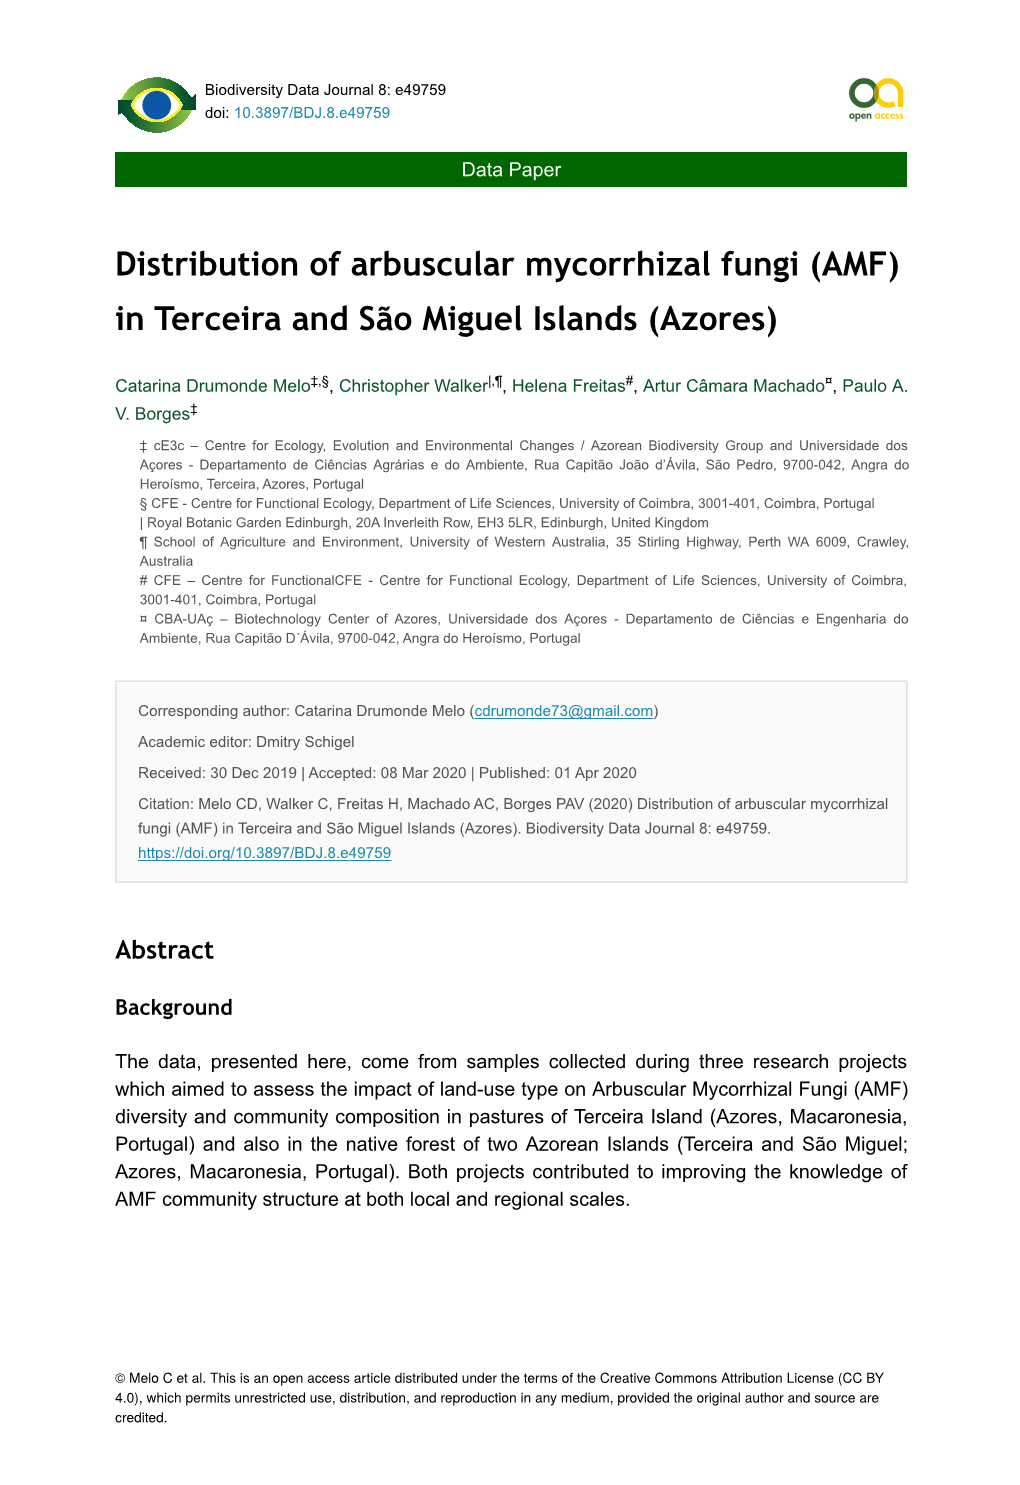 Distribution of Arbuscular Mycorrhizal Fungi (AMF) in Terceira and São Miguel Islands (Azores)